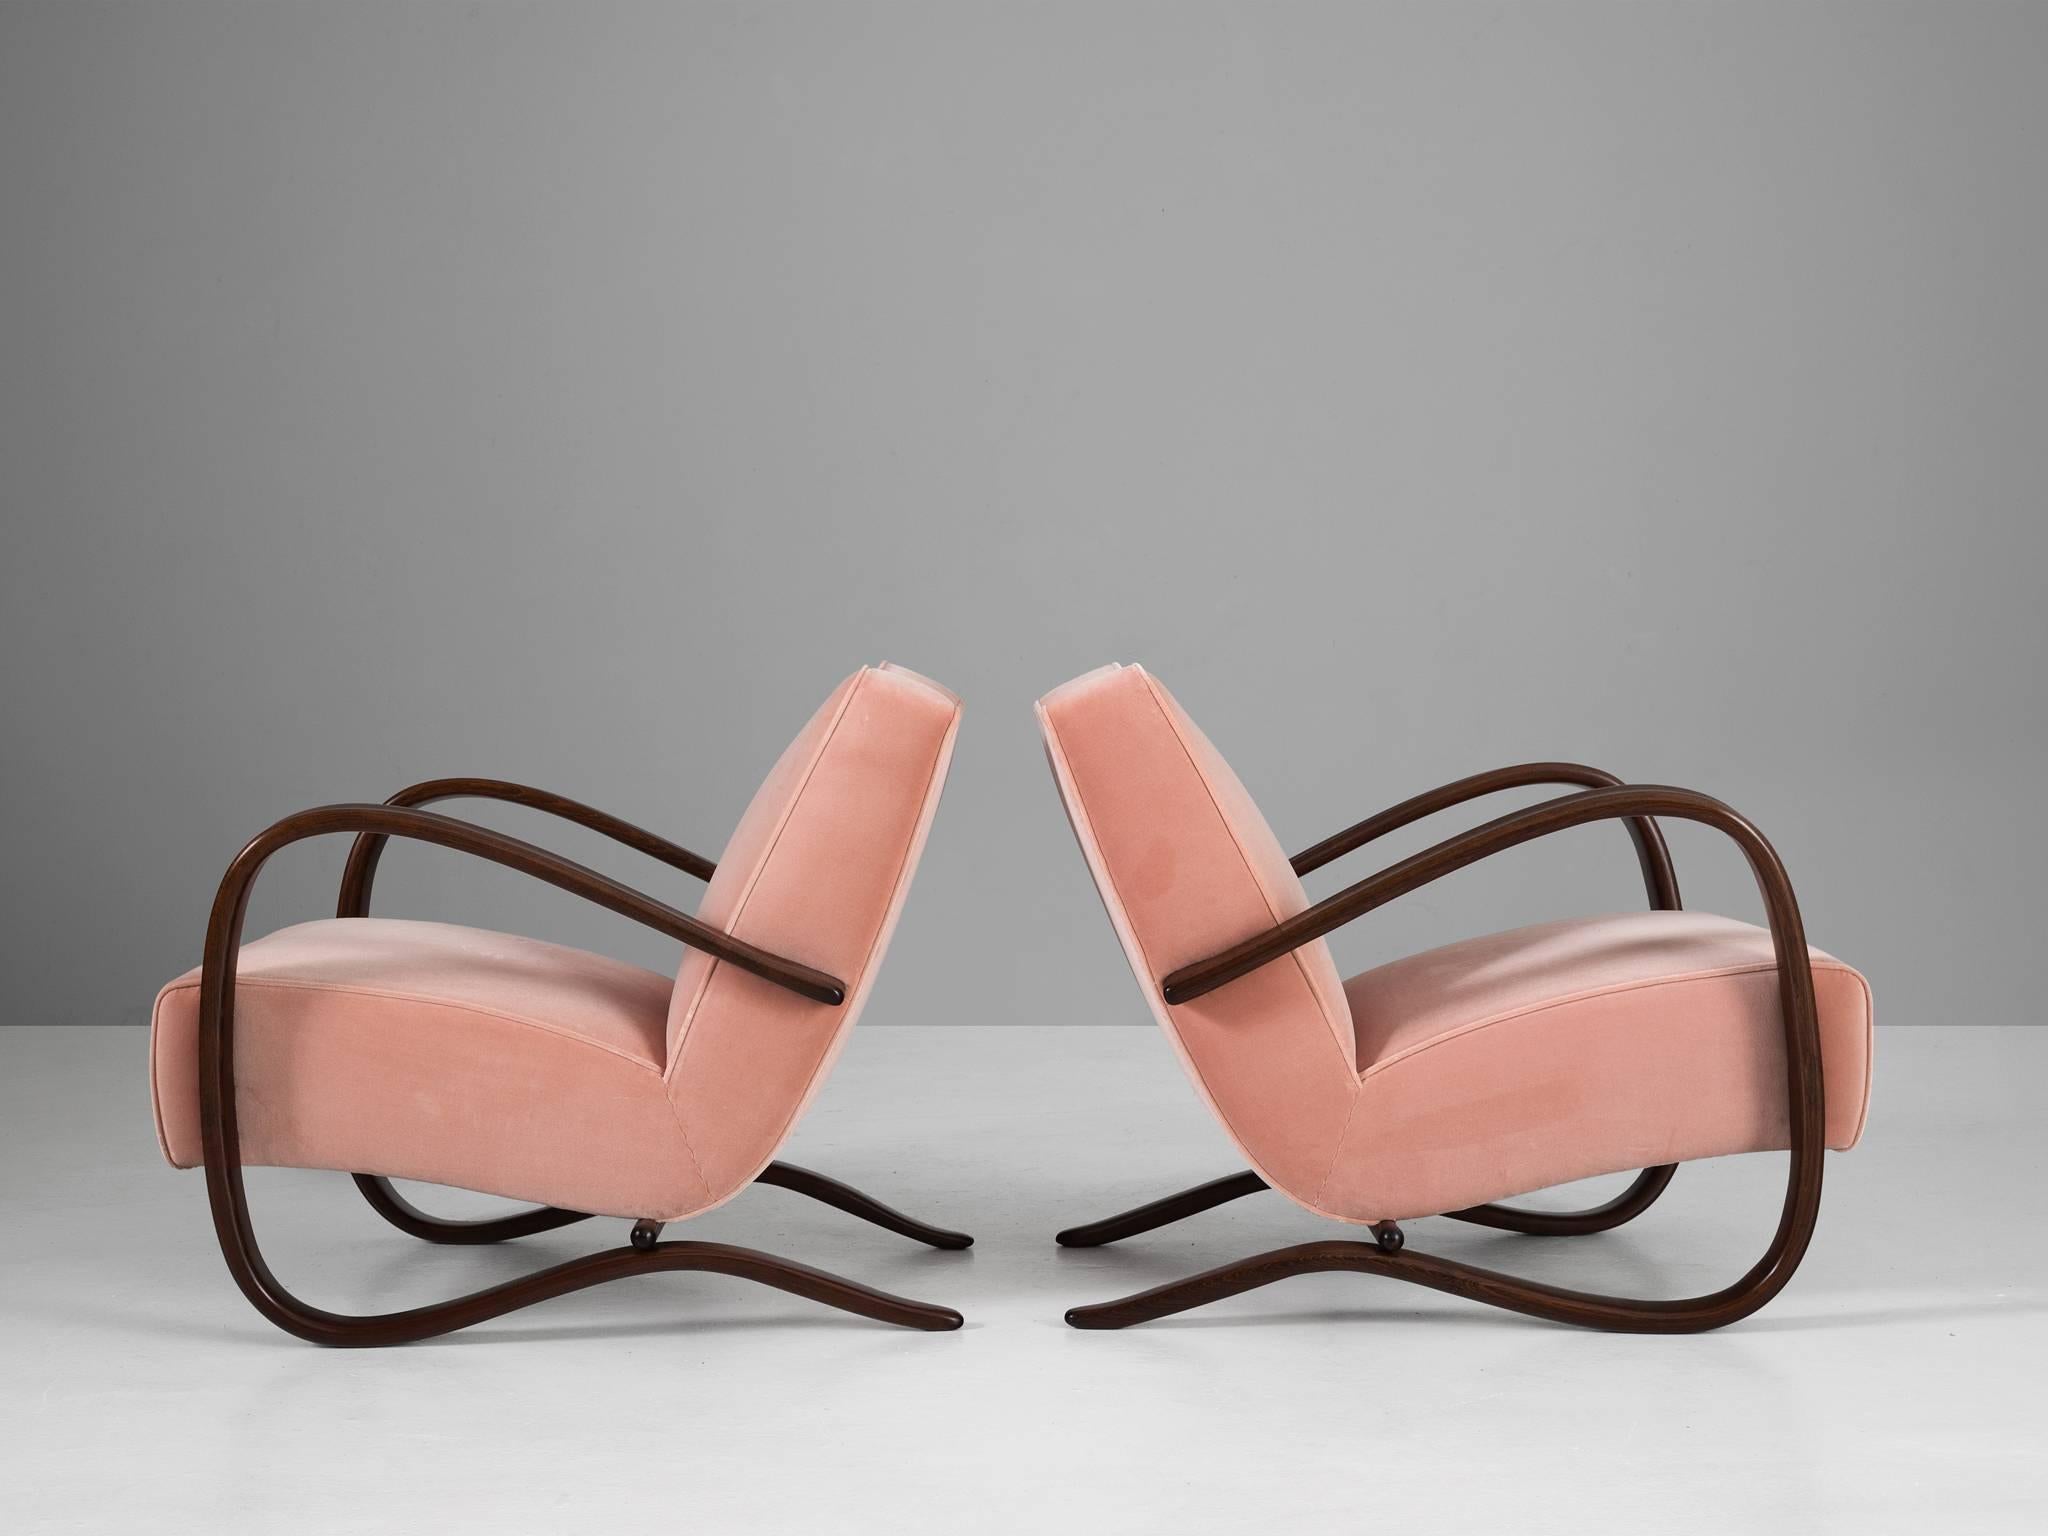 Jindrich Halabala, set of armchairs, Czech Republic, 1930s. 

This extraordinary pair of Halabala chairs are upholstered with pink velvet fabric upholstery in our own upholstery studio. The main feature of this chair by Jindrich Halabala are the